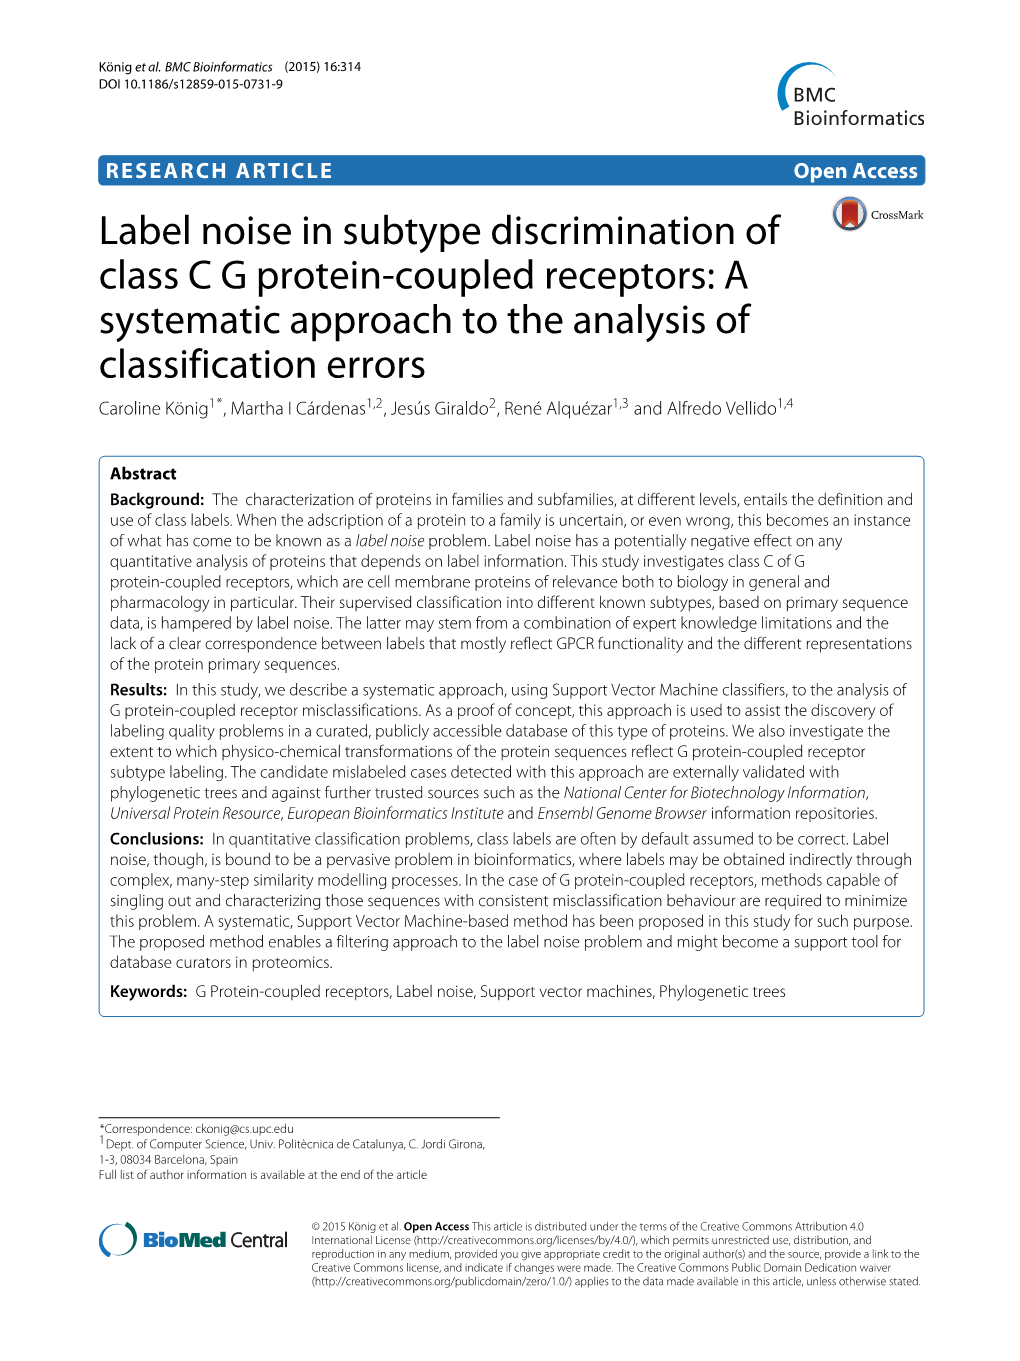 Label Noise in Subtype Discrimination of Class CG Protein-Coupled Receptors